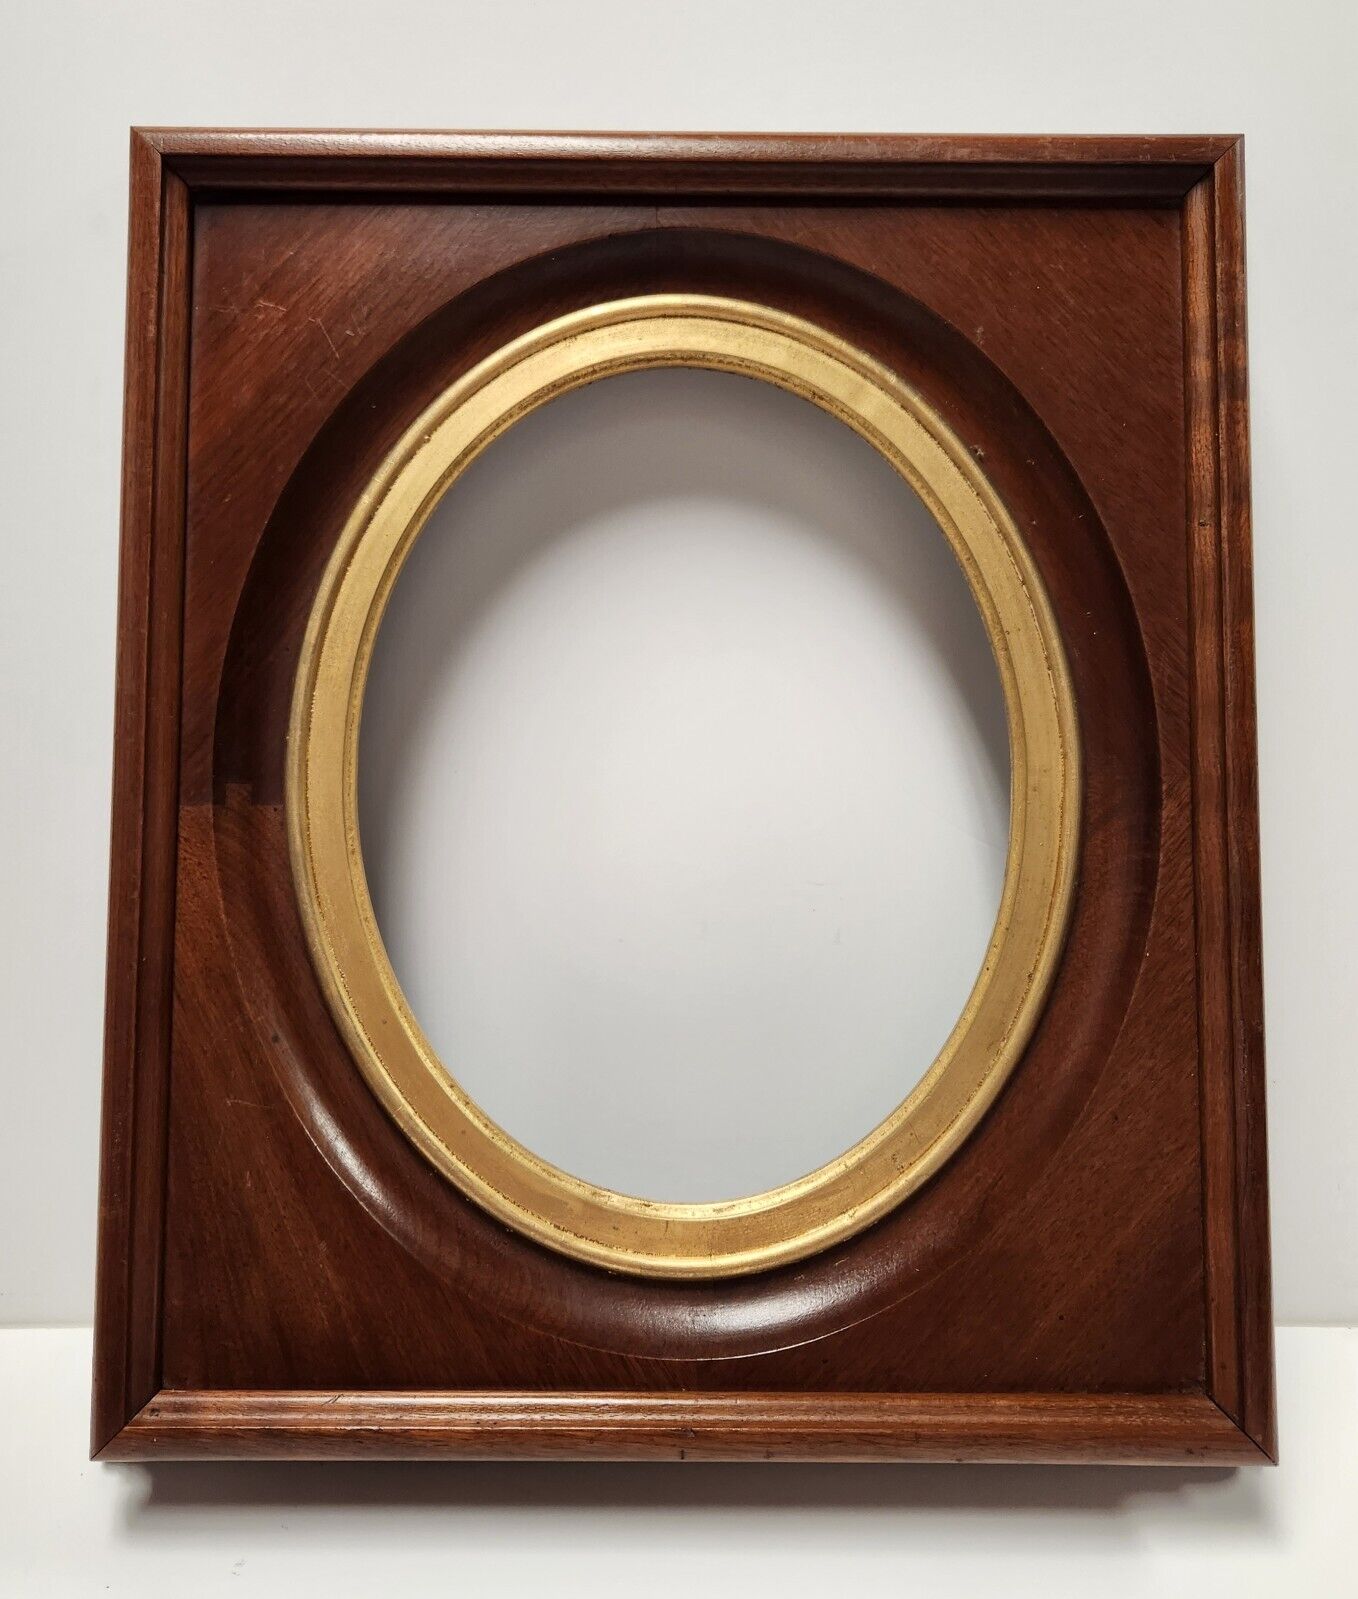 Great Civil War Era 8x10 Oval Wooden Picture Frame!